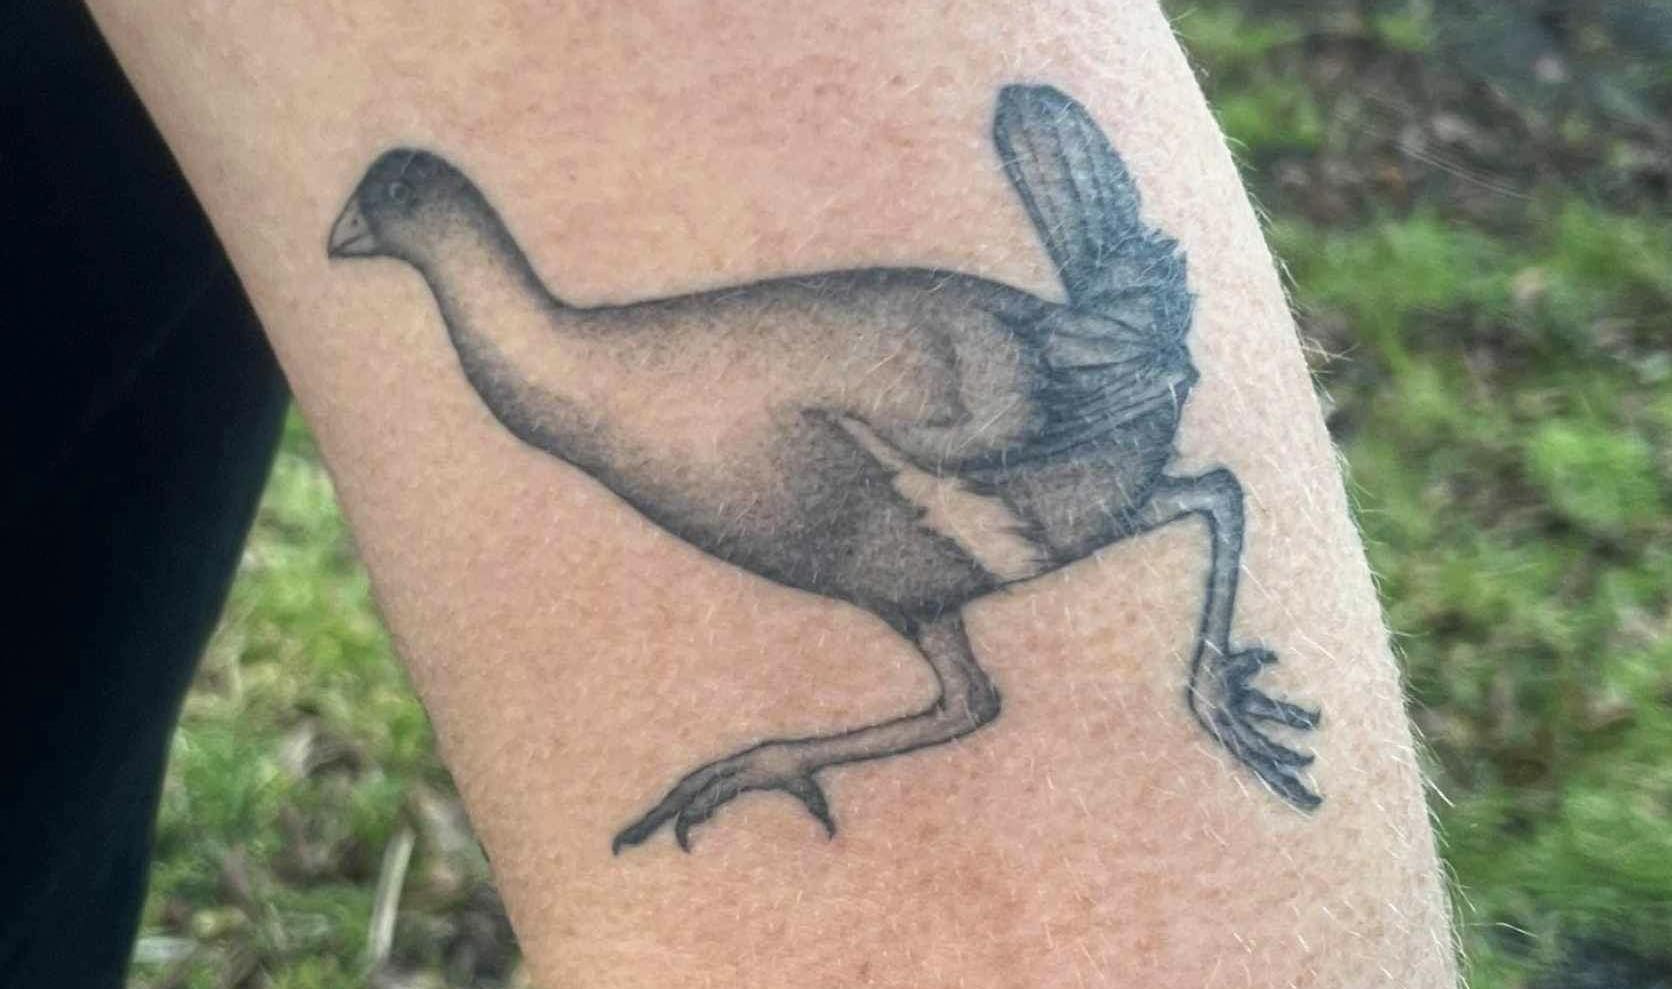 Artm tattooed with a black and white running bird 